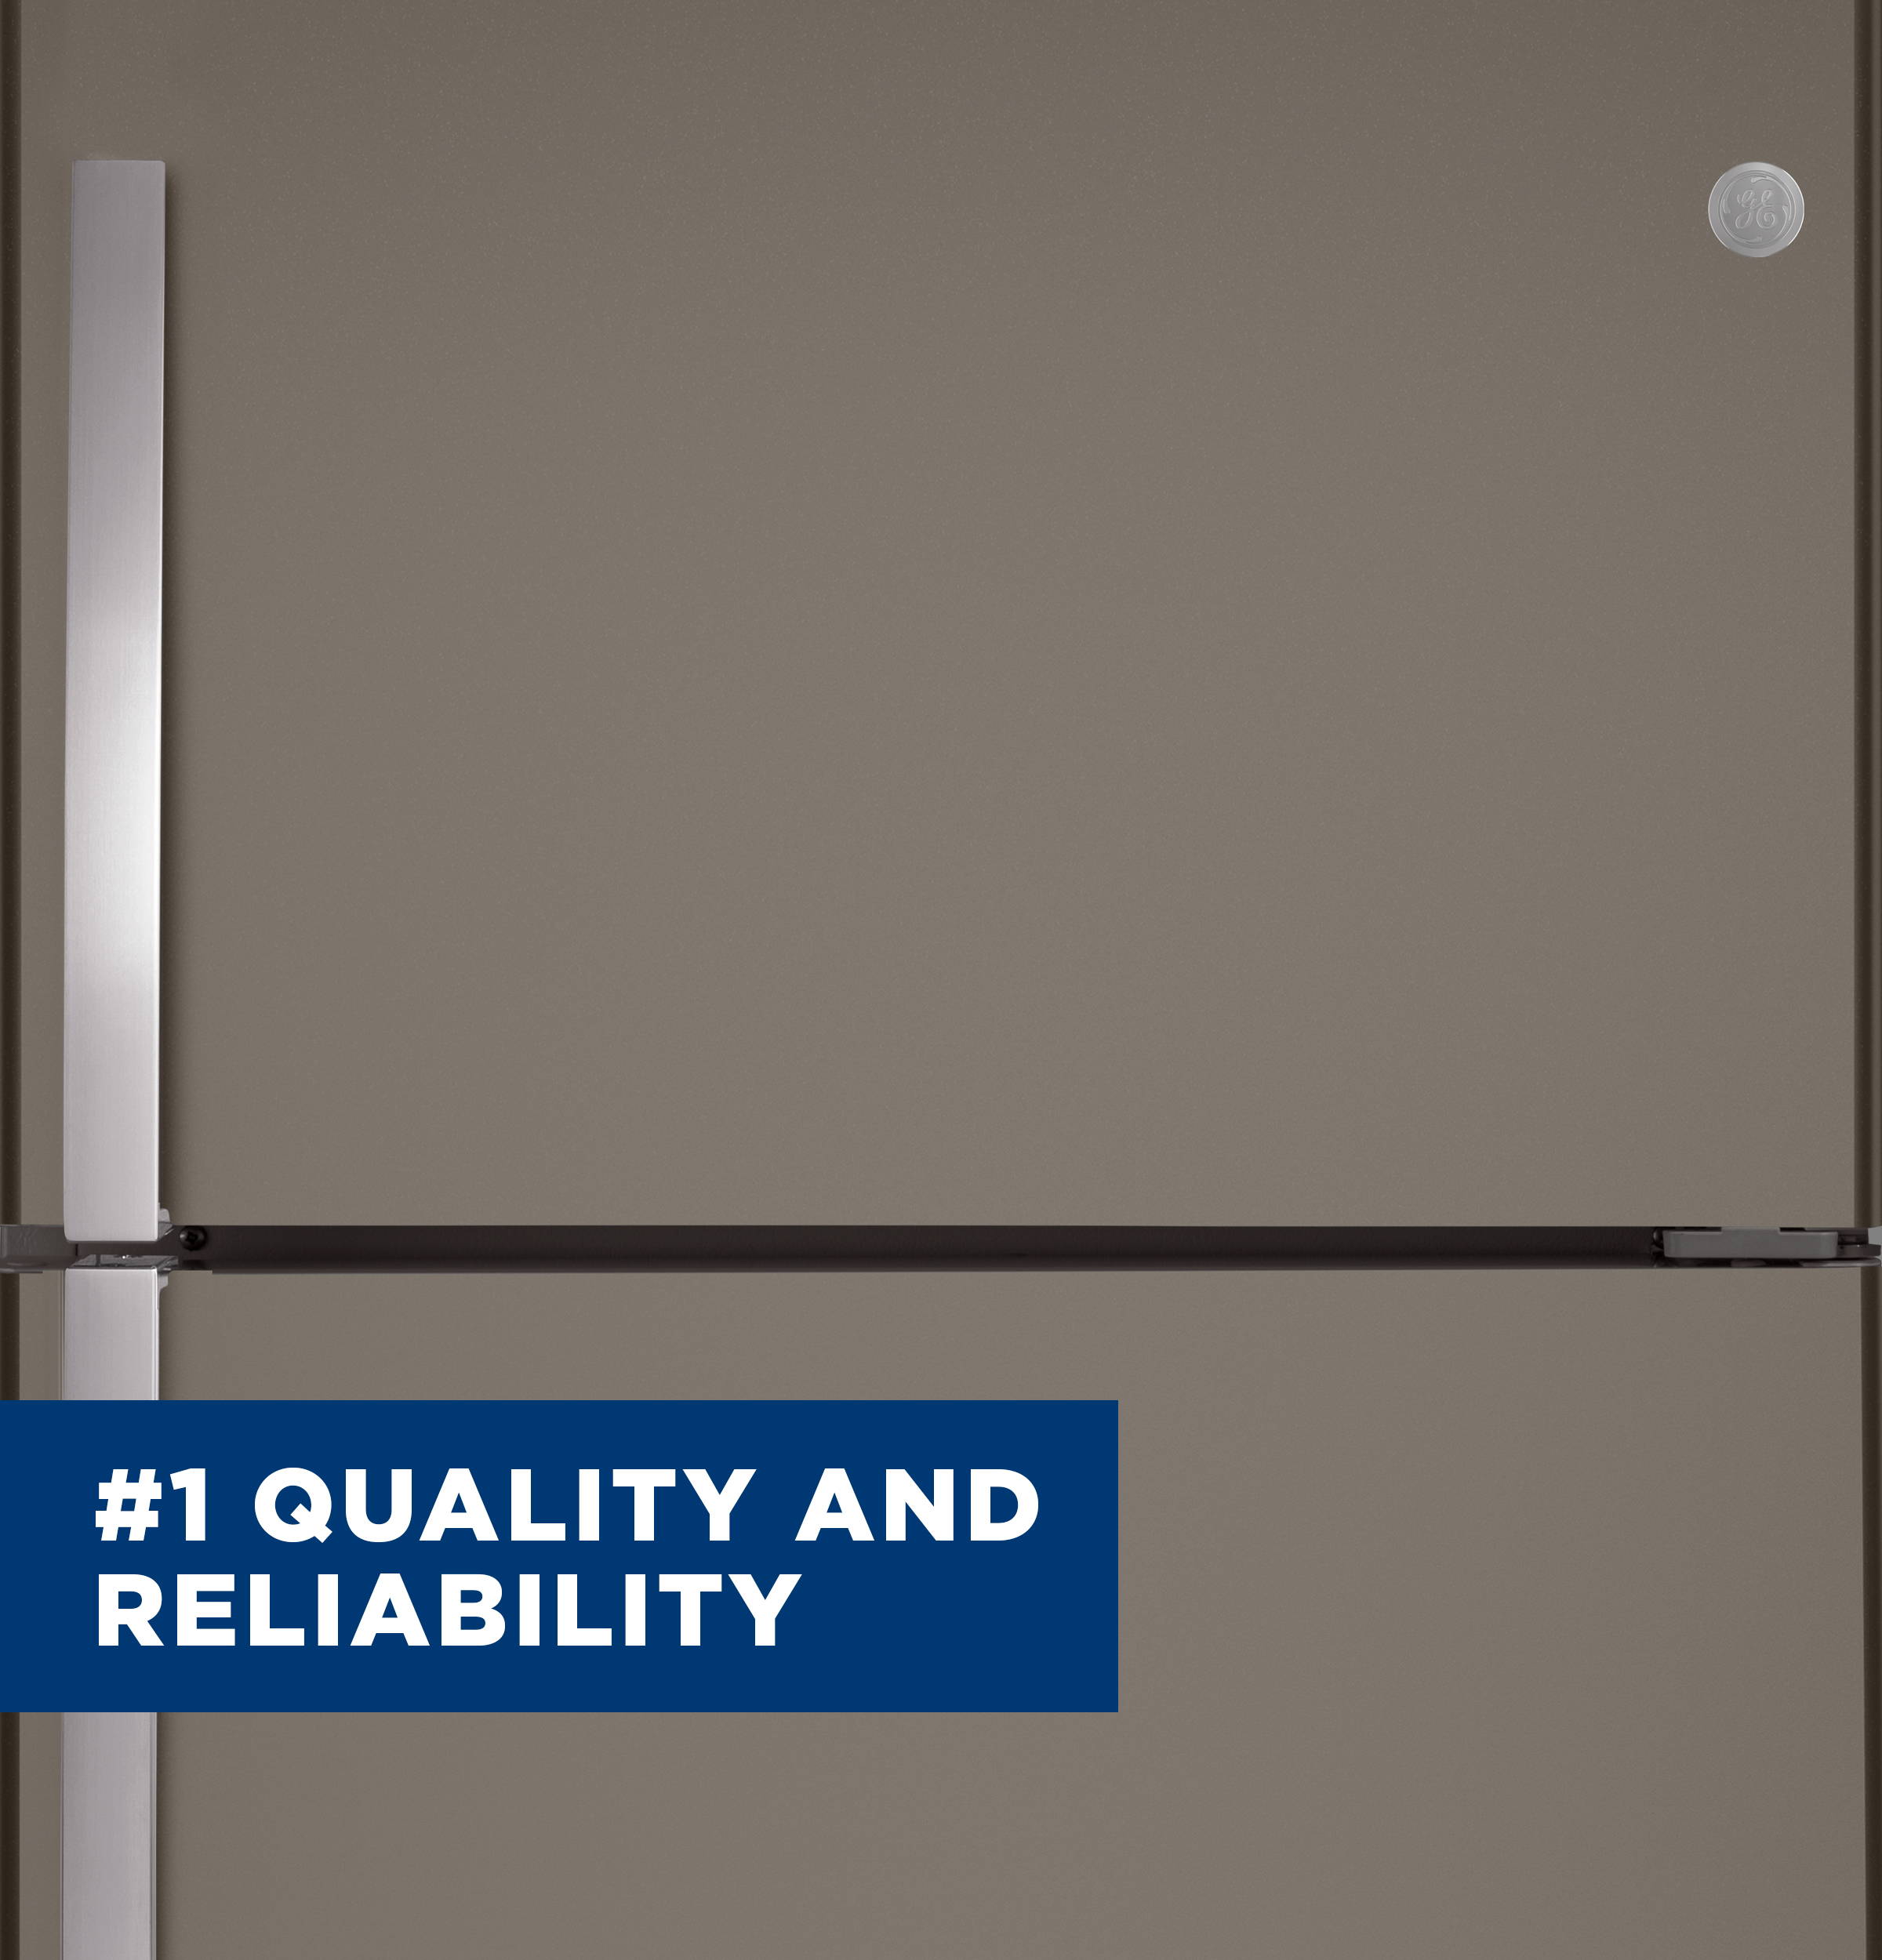 Voted #1 for Quality and Reliable Refrigerators